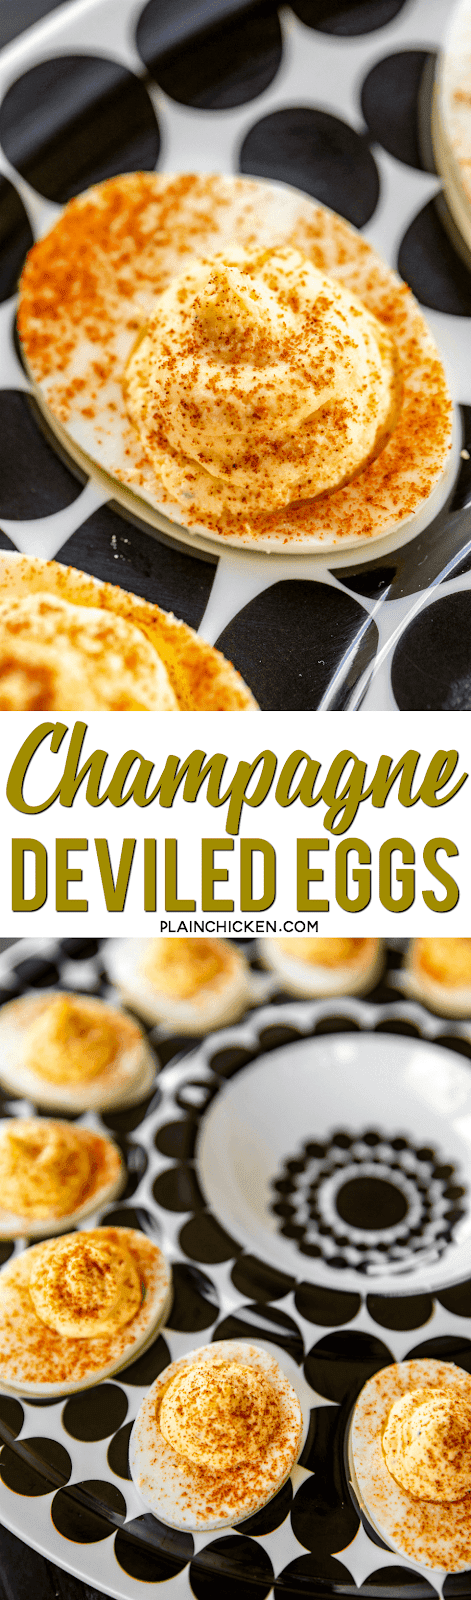 Champagne Deviled Eggs - seriously delicious!! Made these for a party and everyone raved about them!!! Can make ahead of time and refrigerate until ready to serve. Hard boiled eggs, mayonnaise, onion powder, champagne vinegar, salt, pepper, dry mustard. Perfect appetizer for parties and tailgating!! #deviledeggs #newyearsparty #partyfood #champagne